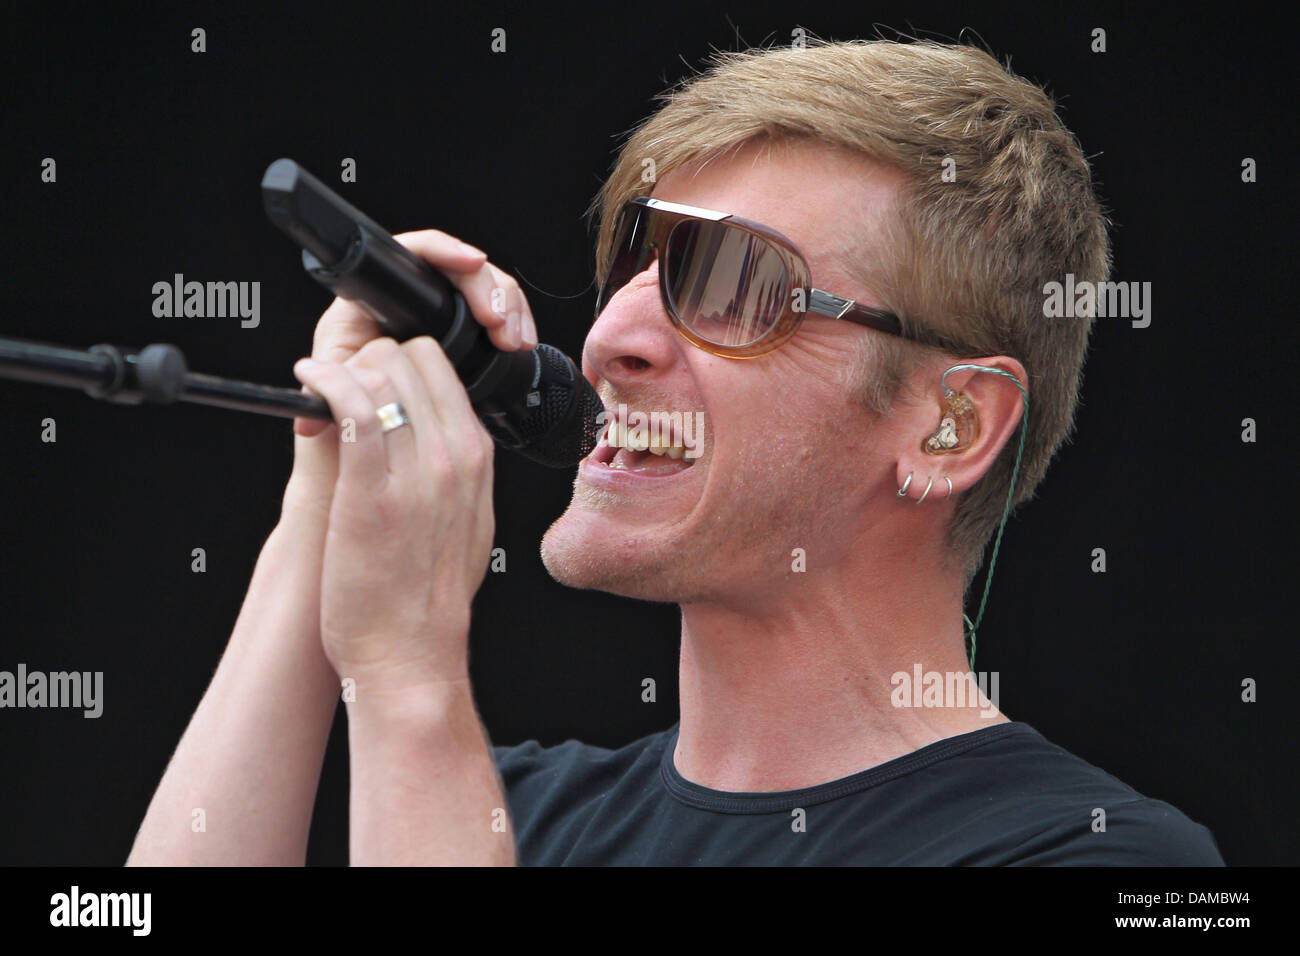 Belgian singer Ozark Henry performs during the music festival "Rock im Park" (rock in the park) in Nuremberg, Germany, 03 June 2011. Tens of thousands of rock music fan are expected at the festival on 5 June 2011. Photo: DANIEL KARMANN Stock Photo